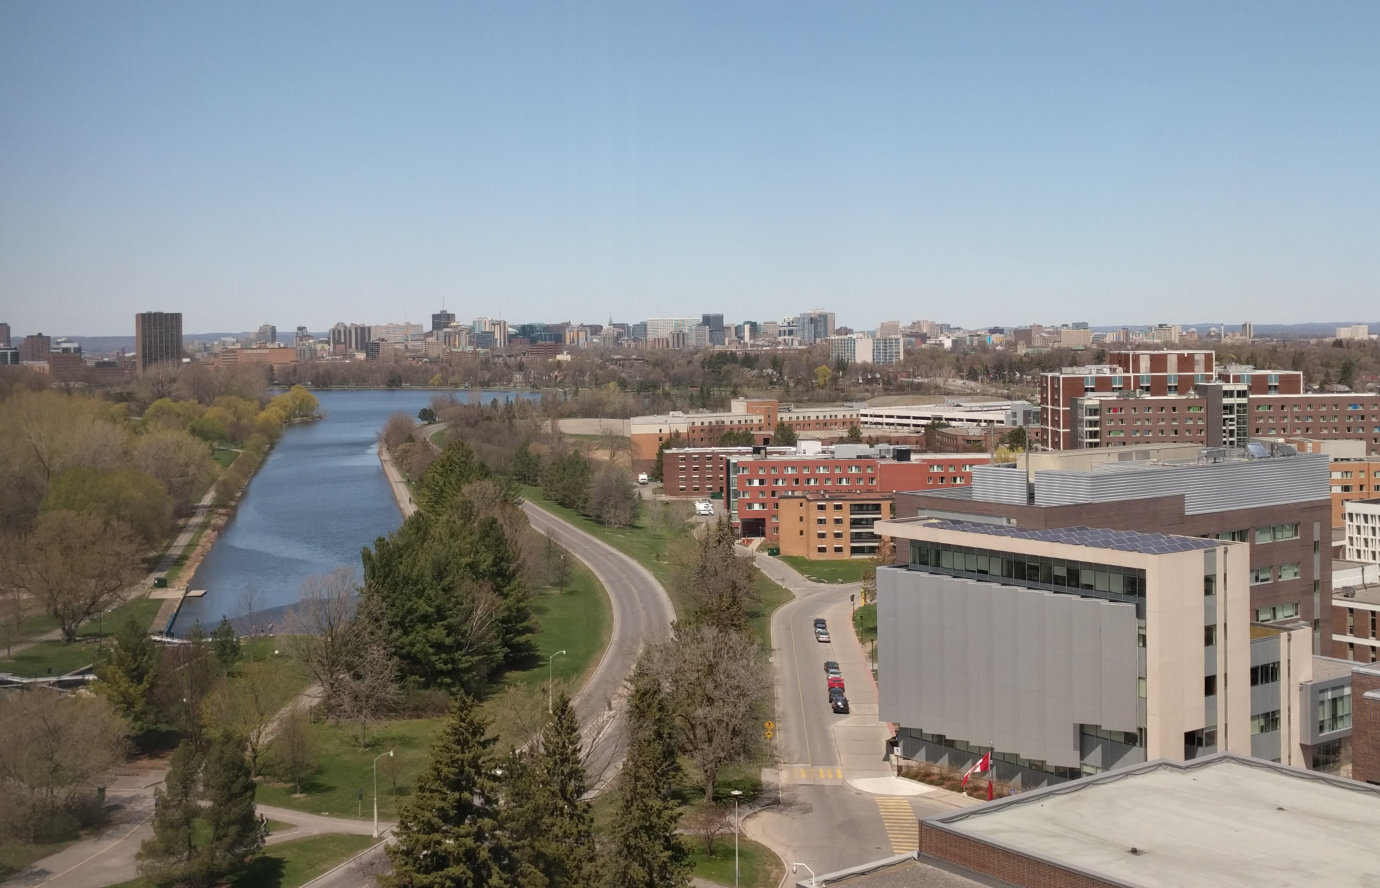 A photo of Carleton University taken by the author from an upper floor of Dunton Tower in 2016, showing the edge of the university campus and Dow’s Lake along the Rideau Canal.